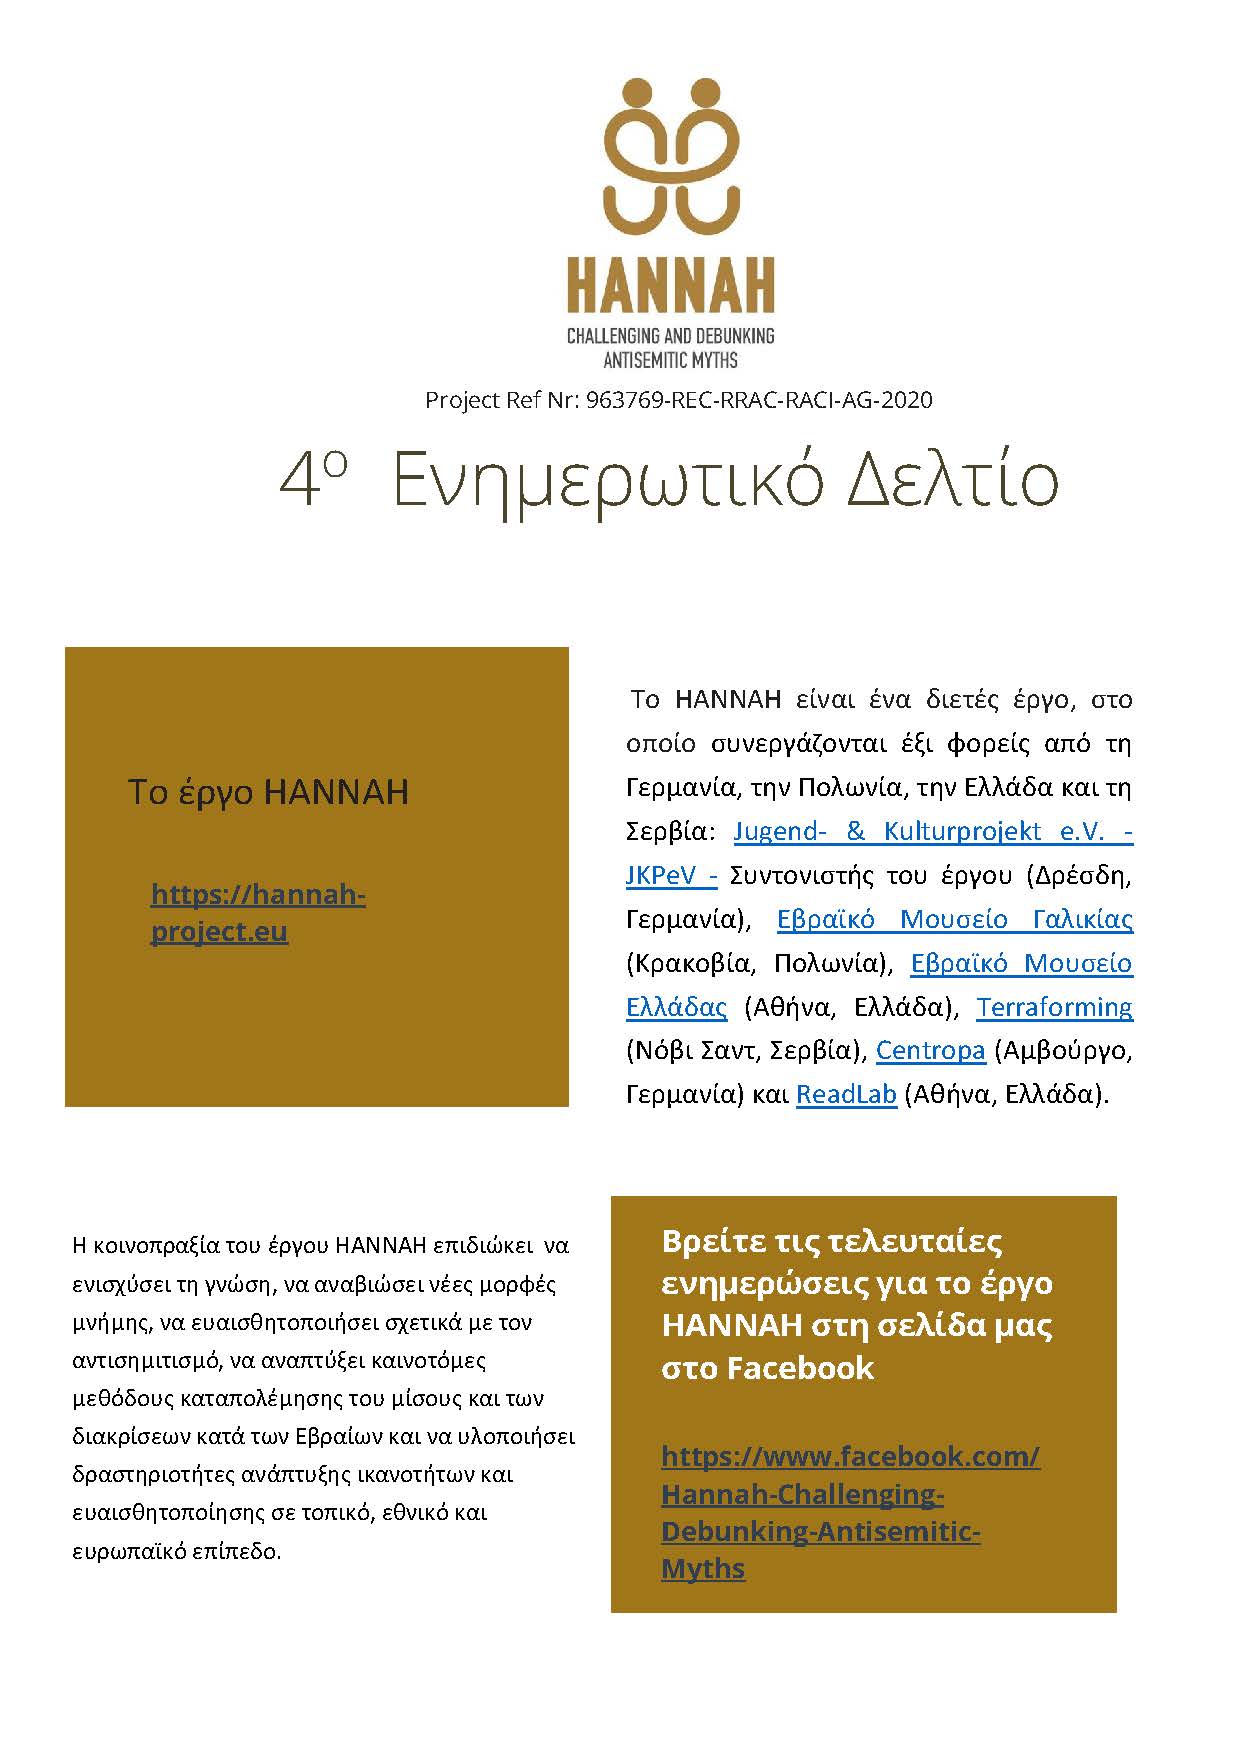 HANNAH 4th newsletter_updated_FINAL2_Page_1